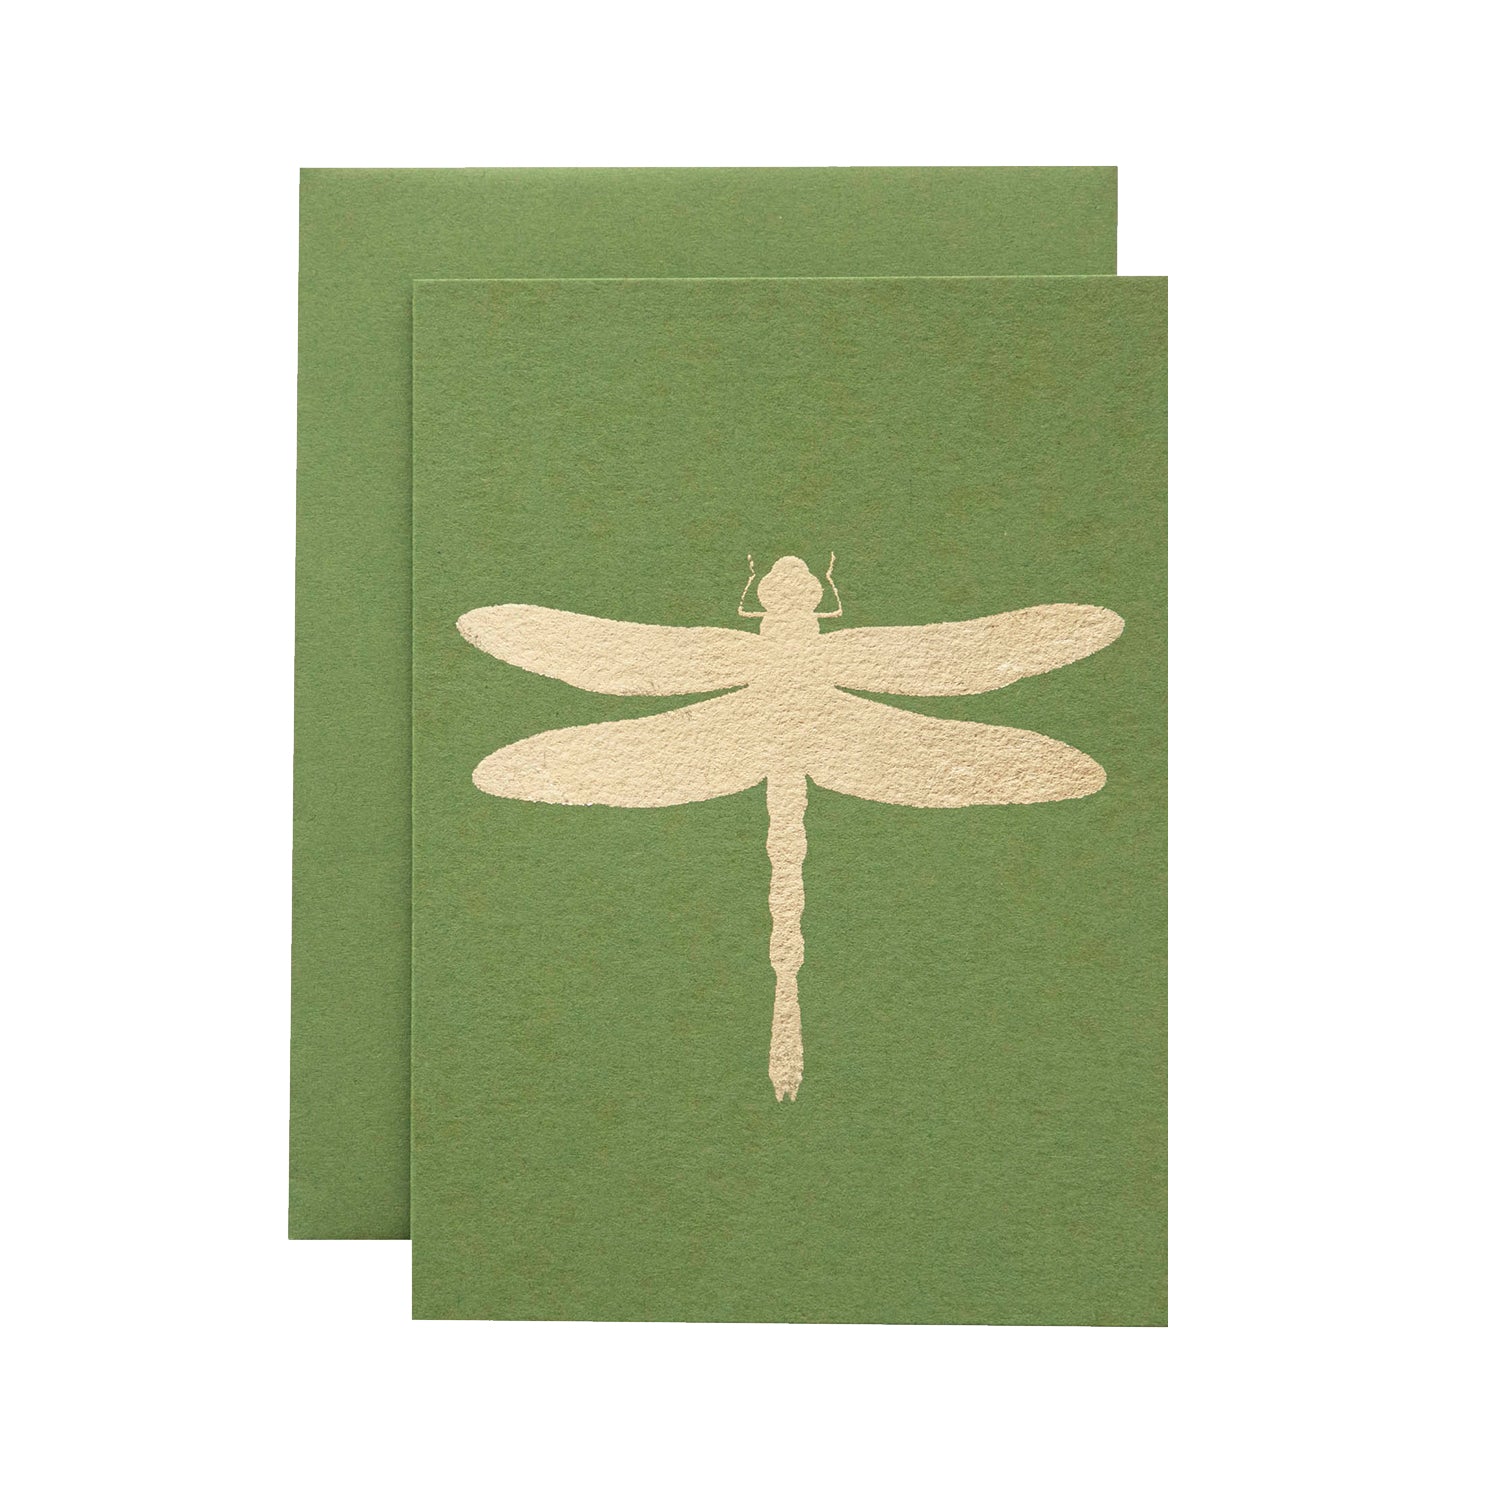 A unique handmade Green Dragonfly Card featuring a dragonfly design and adorned with delicate gold leaf by Hester &amp; Cook.